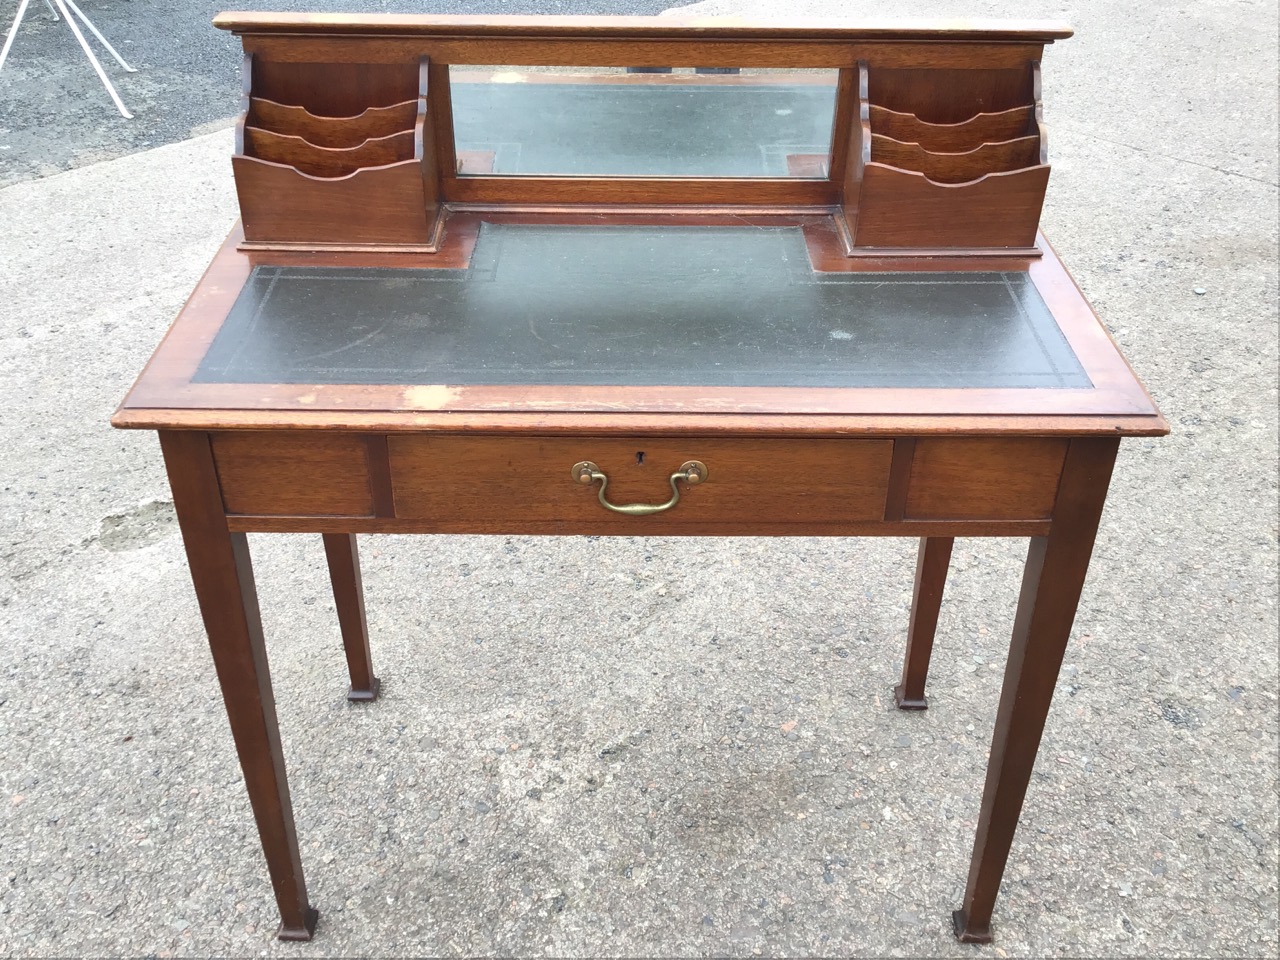 An Edwardian mahogany writing desk with raised back having central mirror flanked by stationery - Image 2 of 3